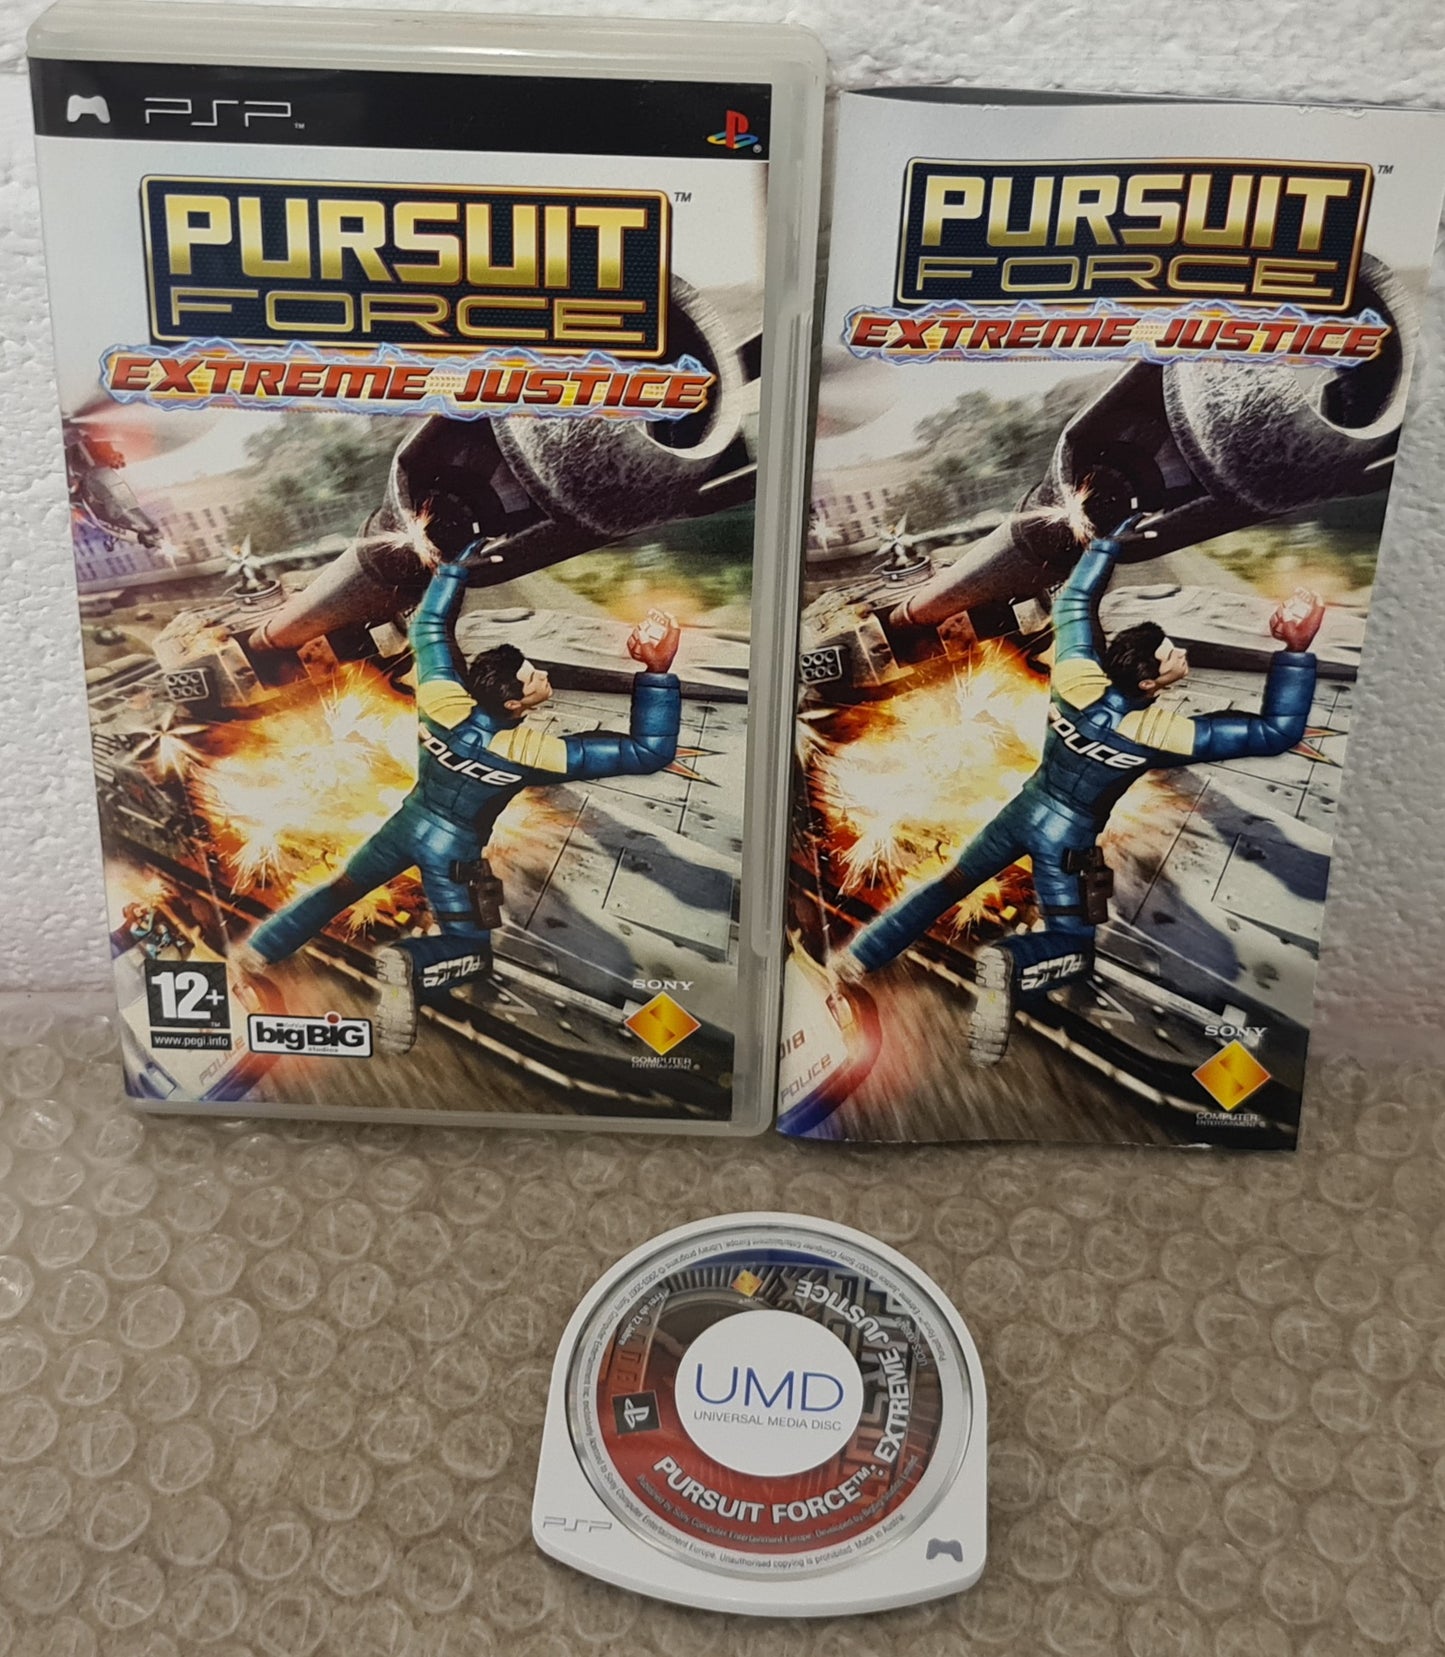 Pursuit Force Extreme Justice Sony PSP Game